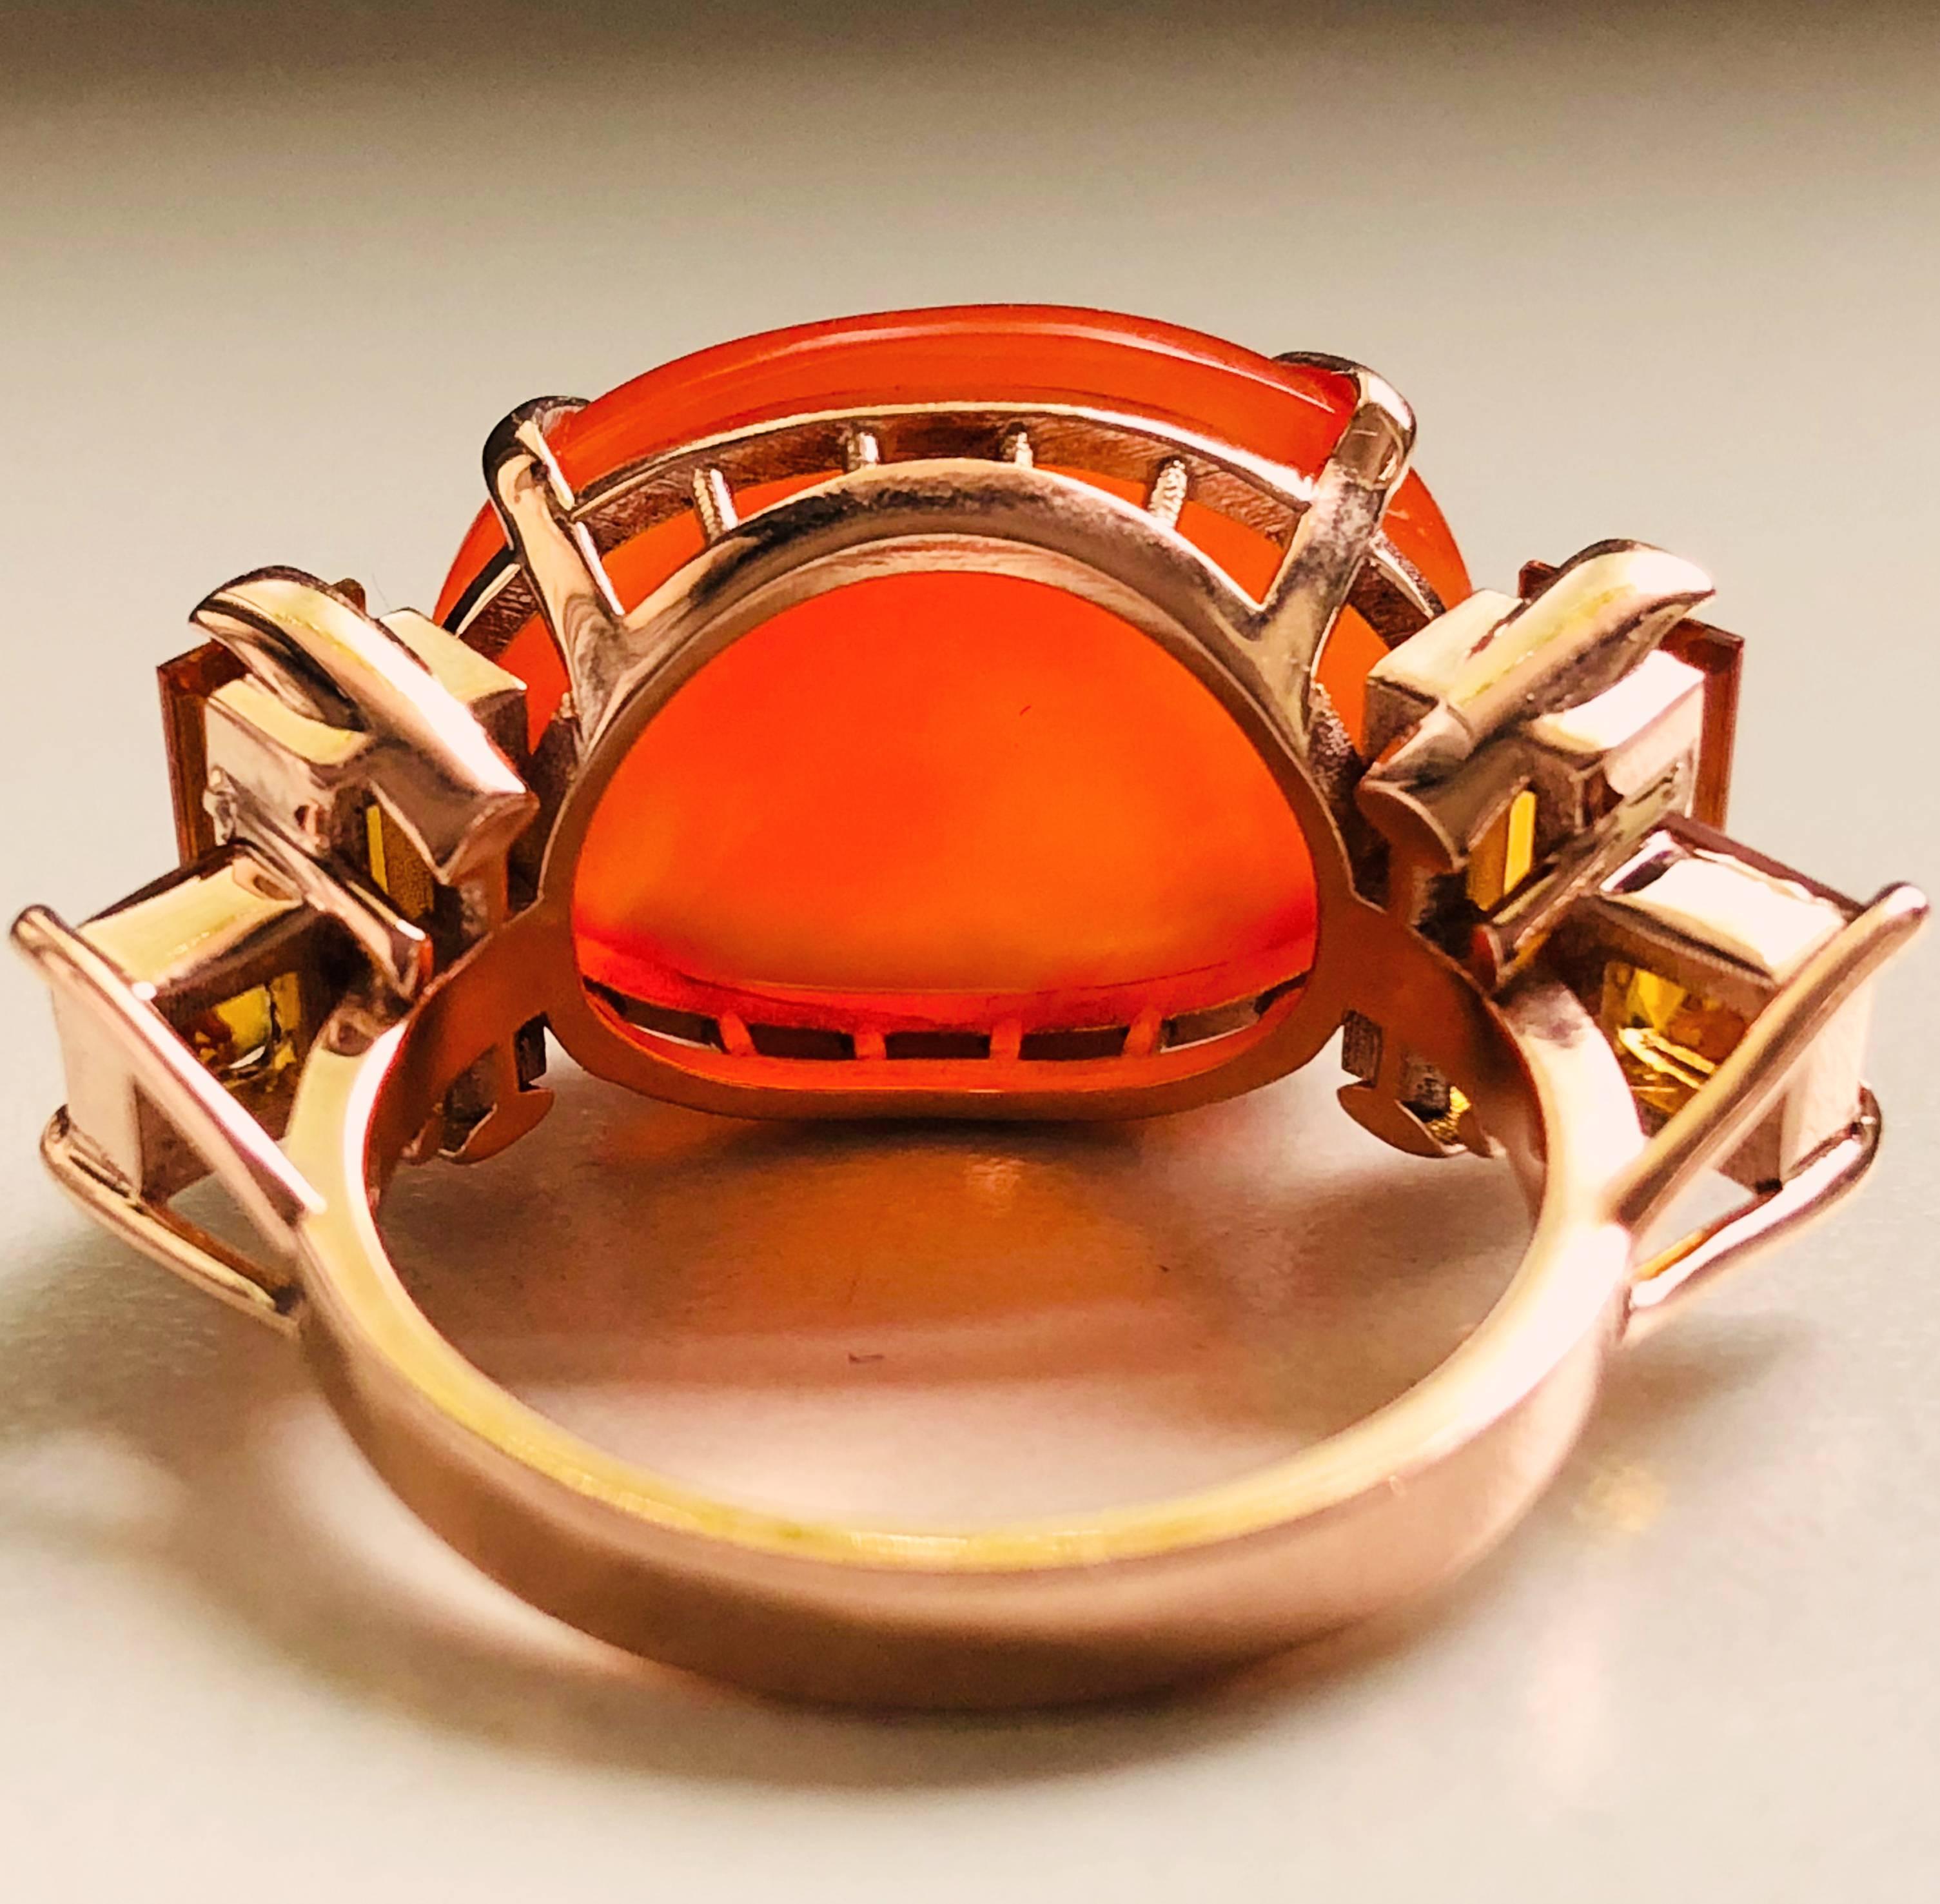 Women's One-of-a-Kind 15 Carat Natural Carnelian Cabochon Citrine Baguette Cocktail Ring